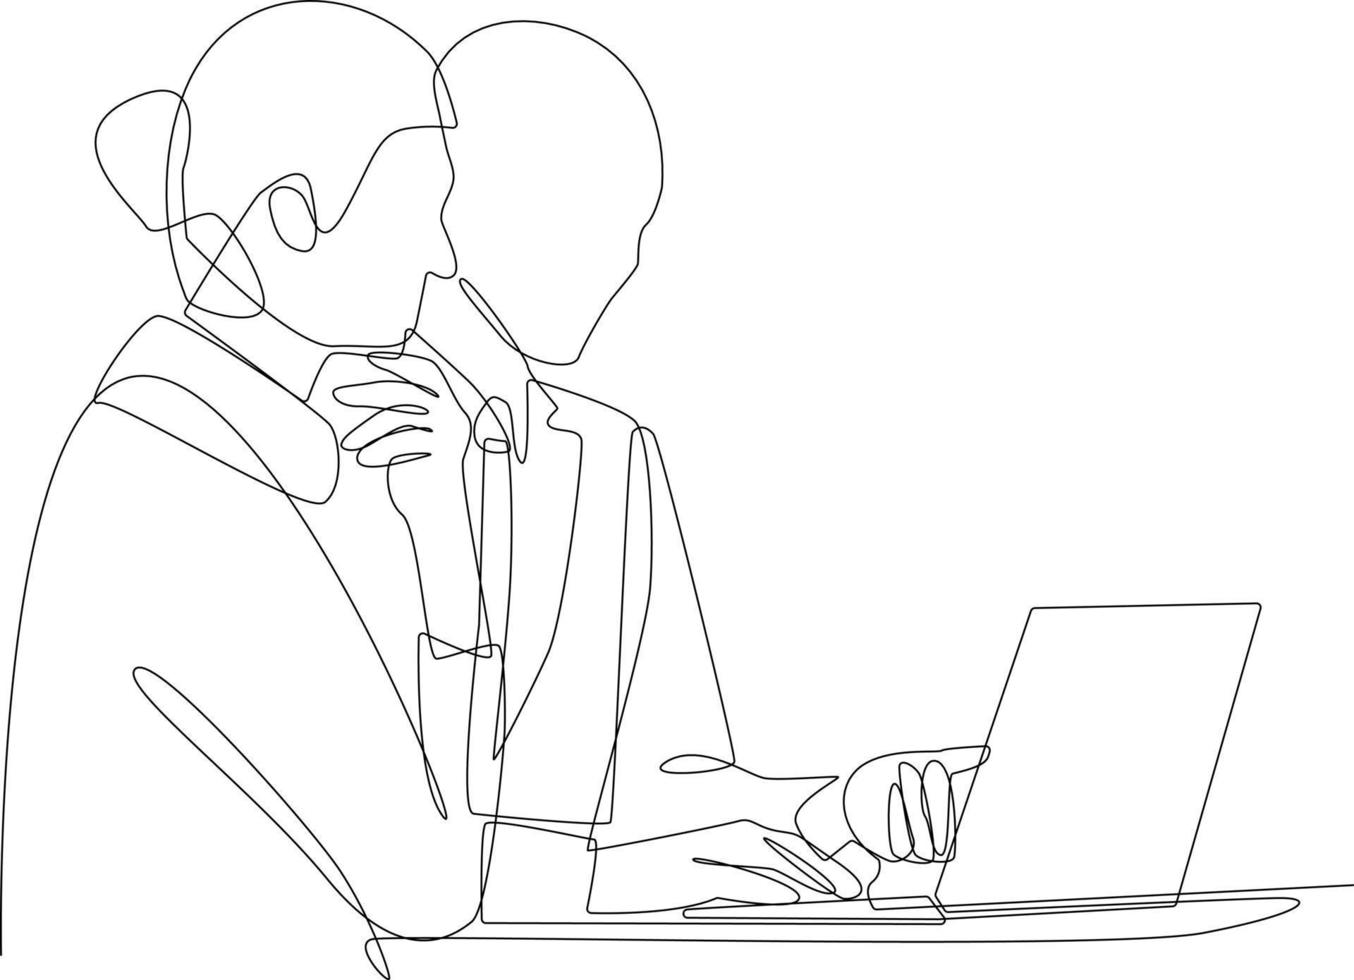 Continuous one line drawing businesswoman sitting and consulting with young professional man at office. Business consulting concept. Single line draw design vector graphic illustration.